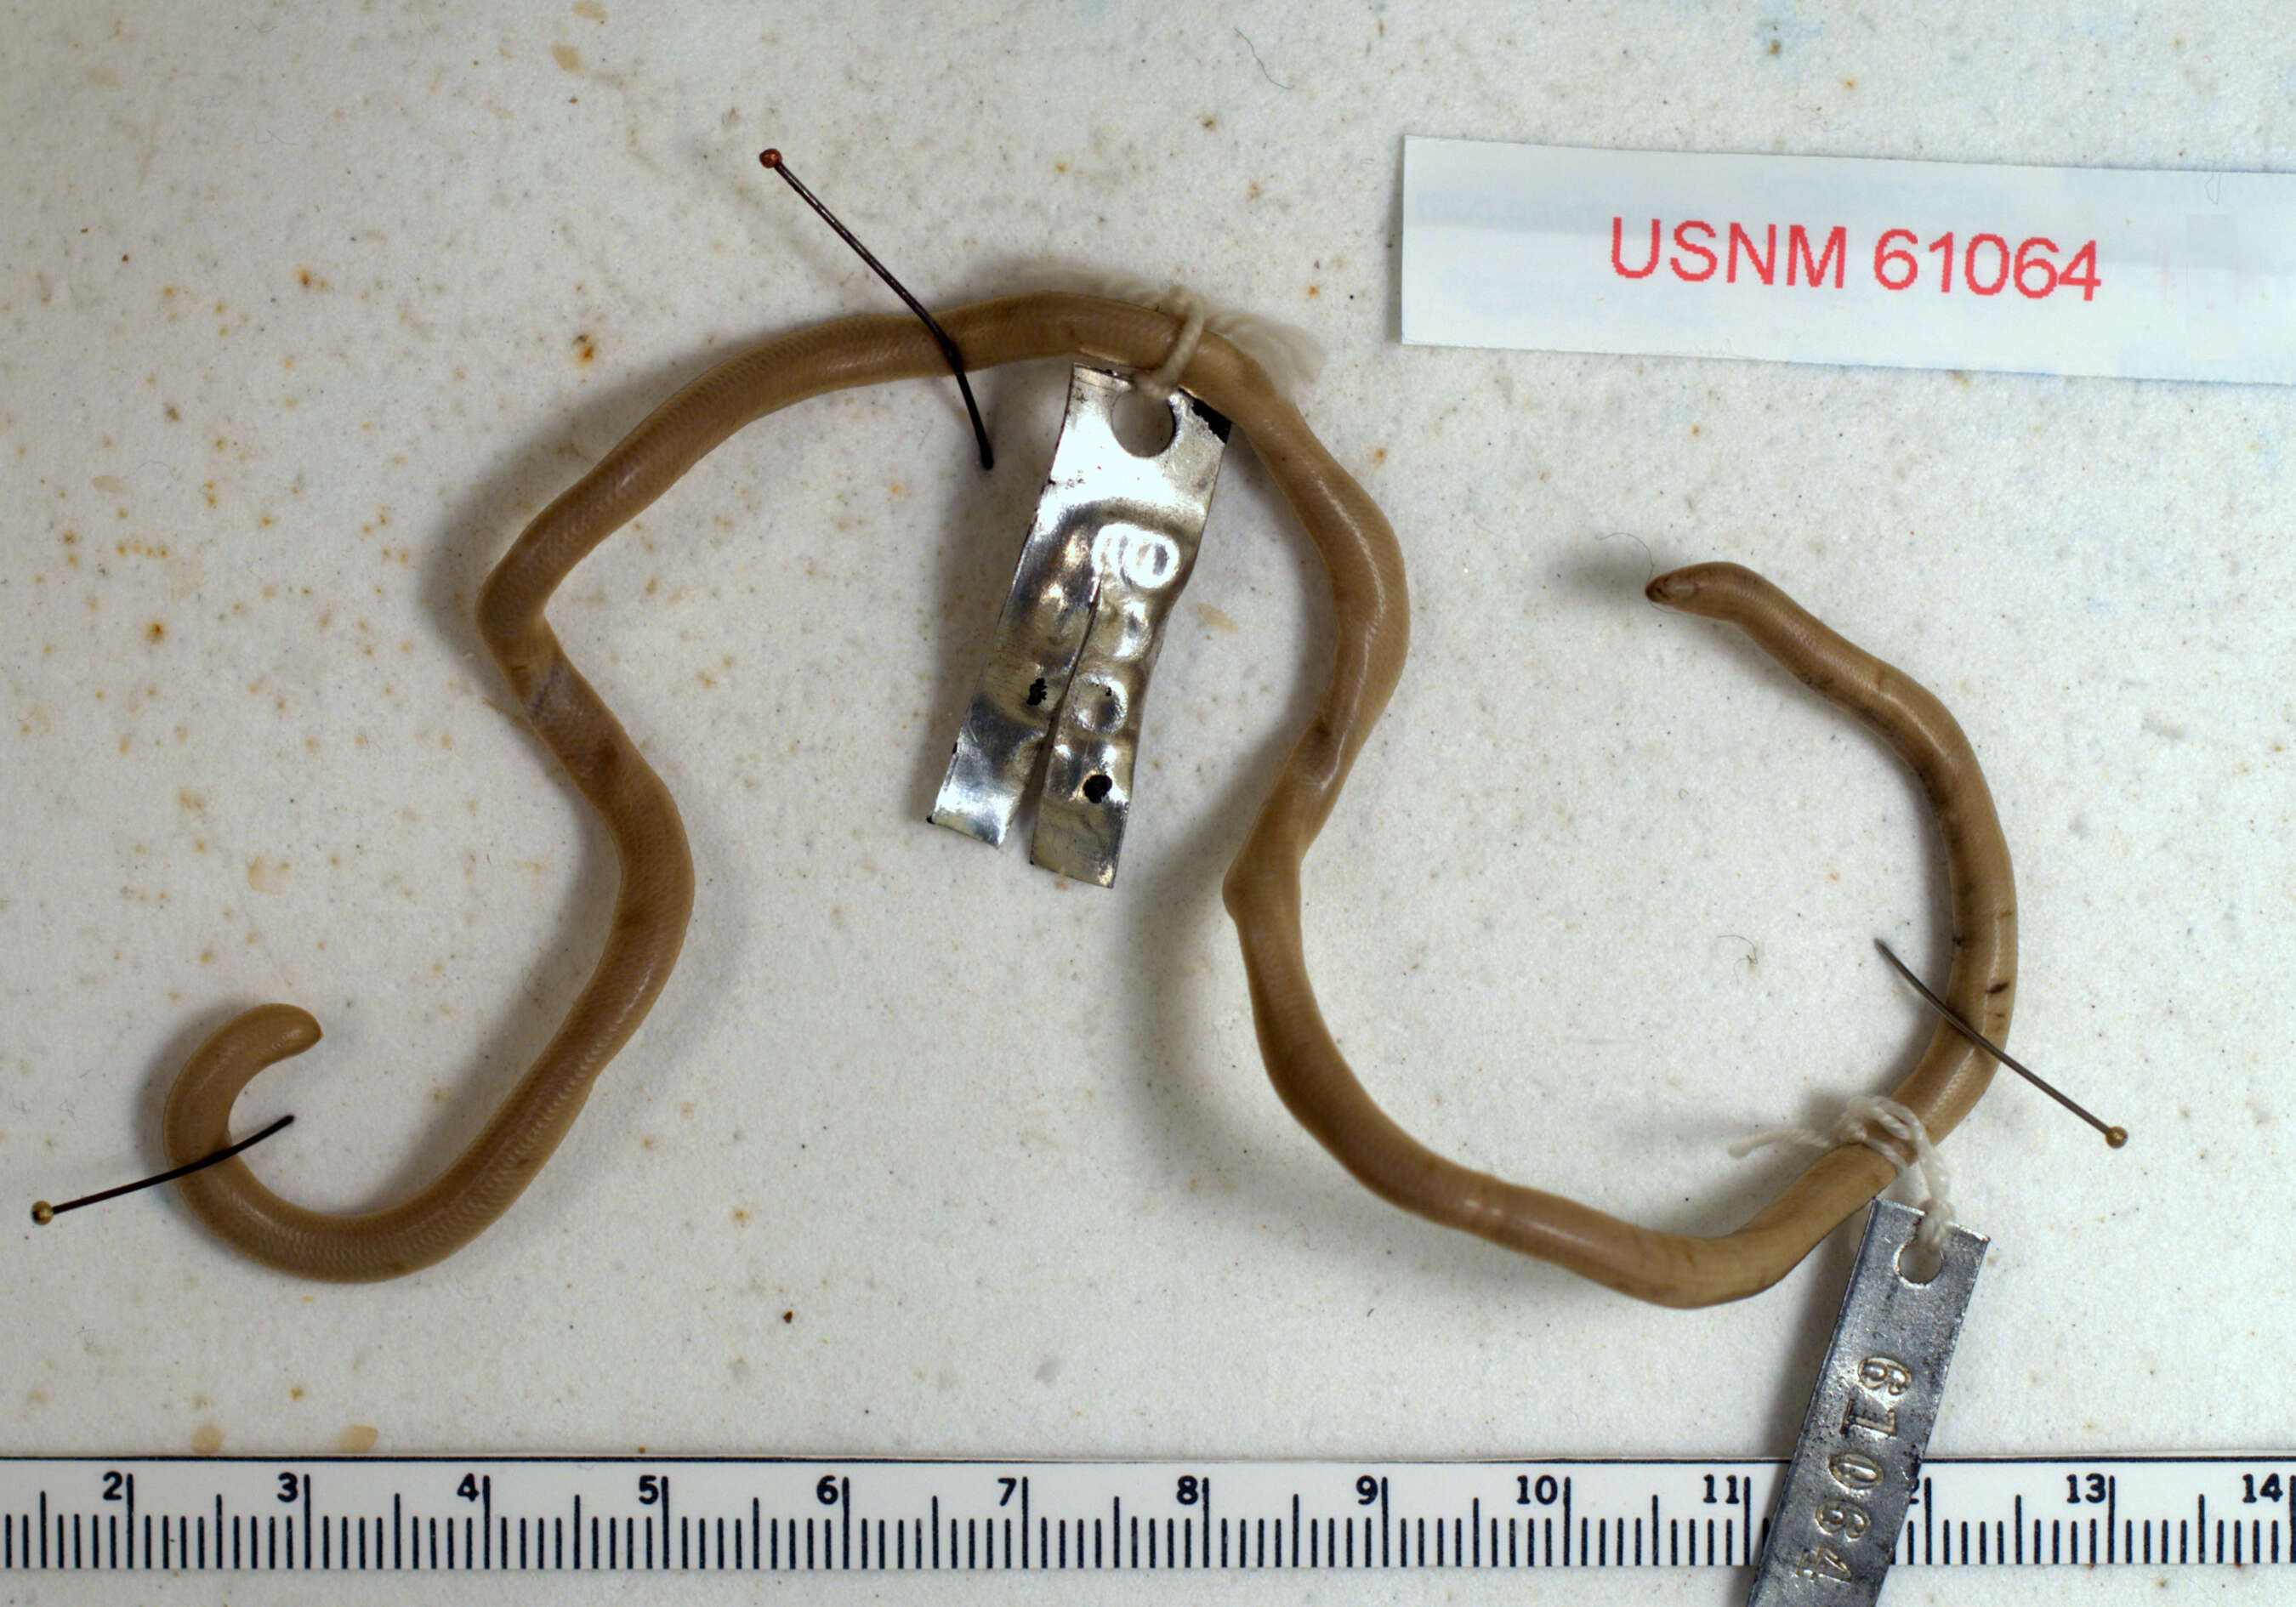 Image of Yucatecan Worm Snake